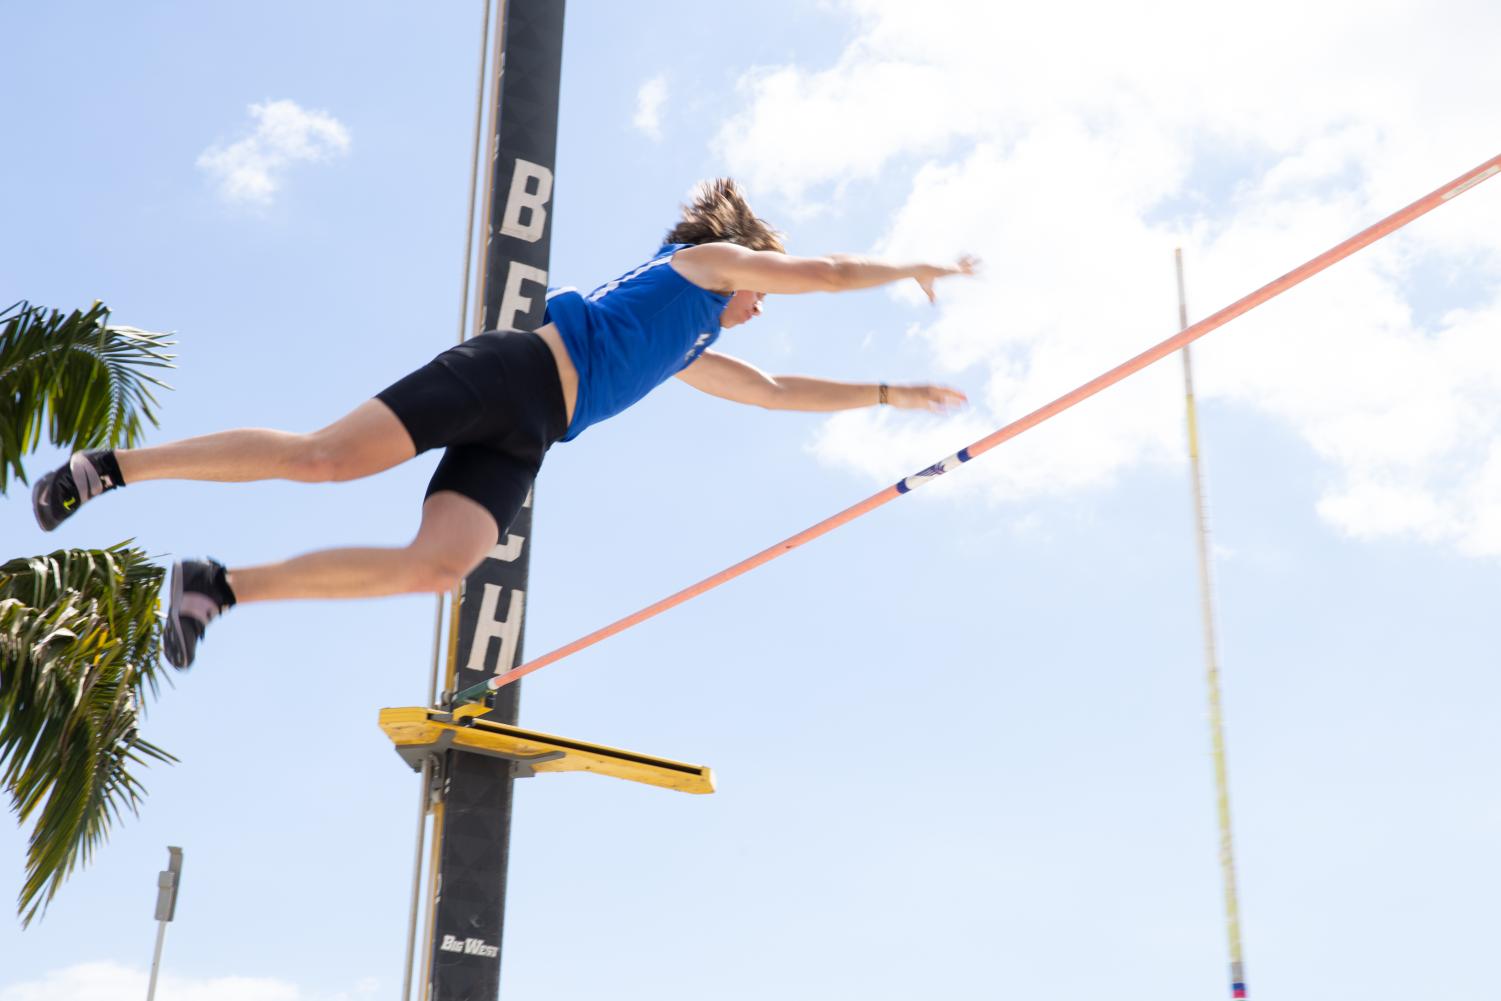 Connor Gannon passes the bar in the men's pole vaulting event held at the track and field Beach Opener in Long Beach, CA, on Friday, March 4, 2022.